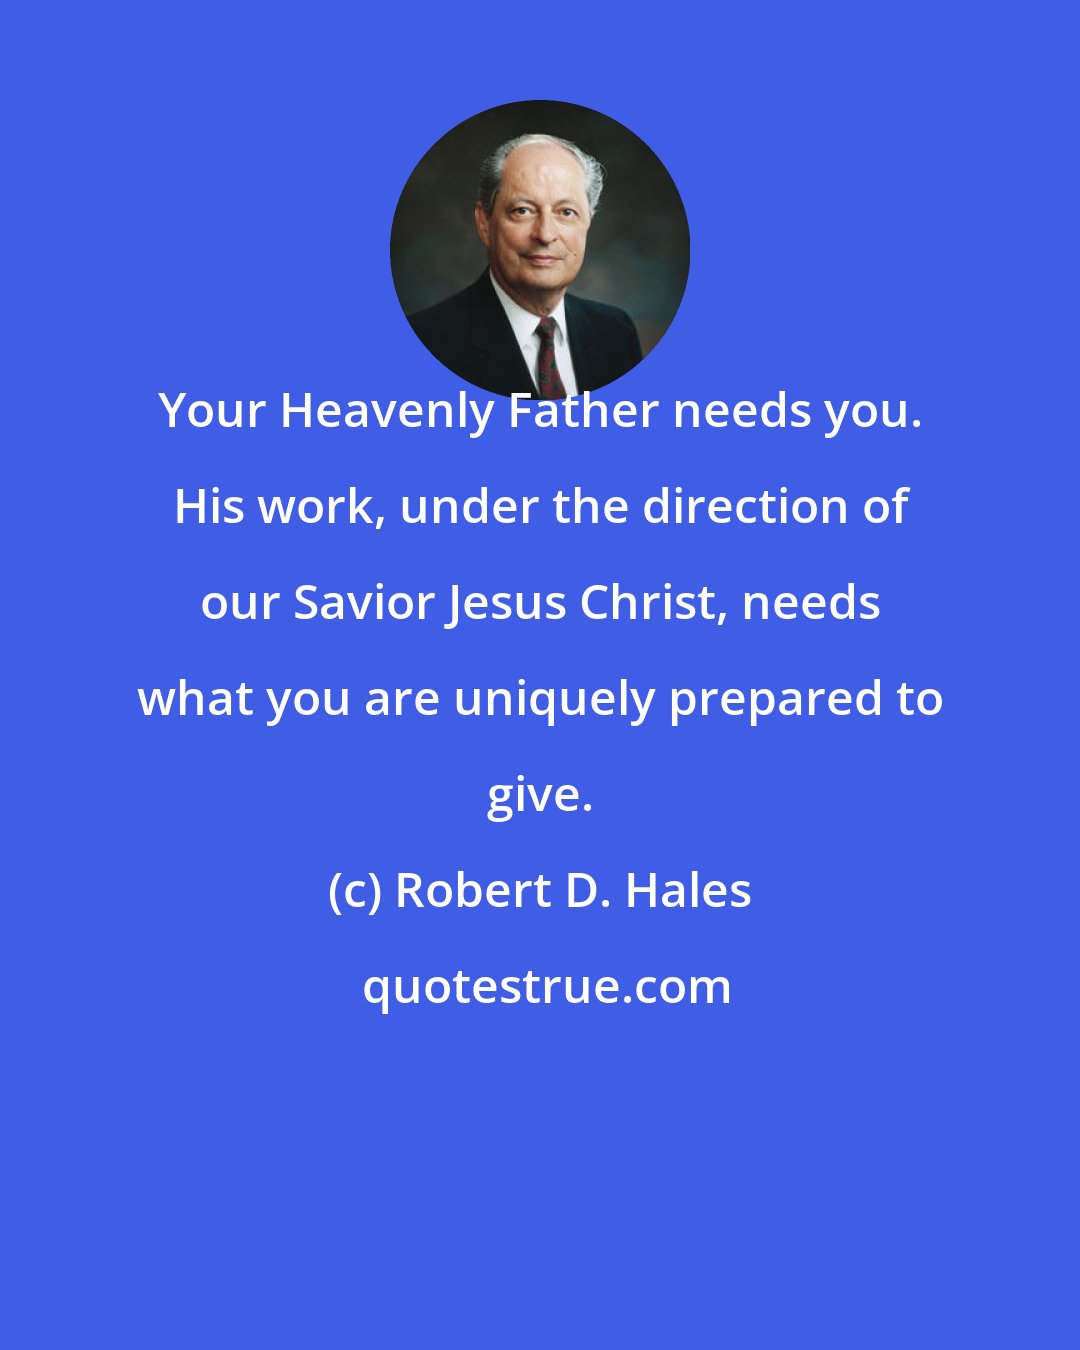 Robert D. Hales: Your Heavenly Father needs you. His work, under the direction of our Savior Jesus Christ, needs what you are uniquely prepared to give.